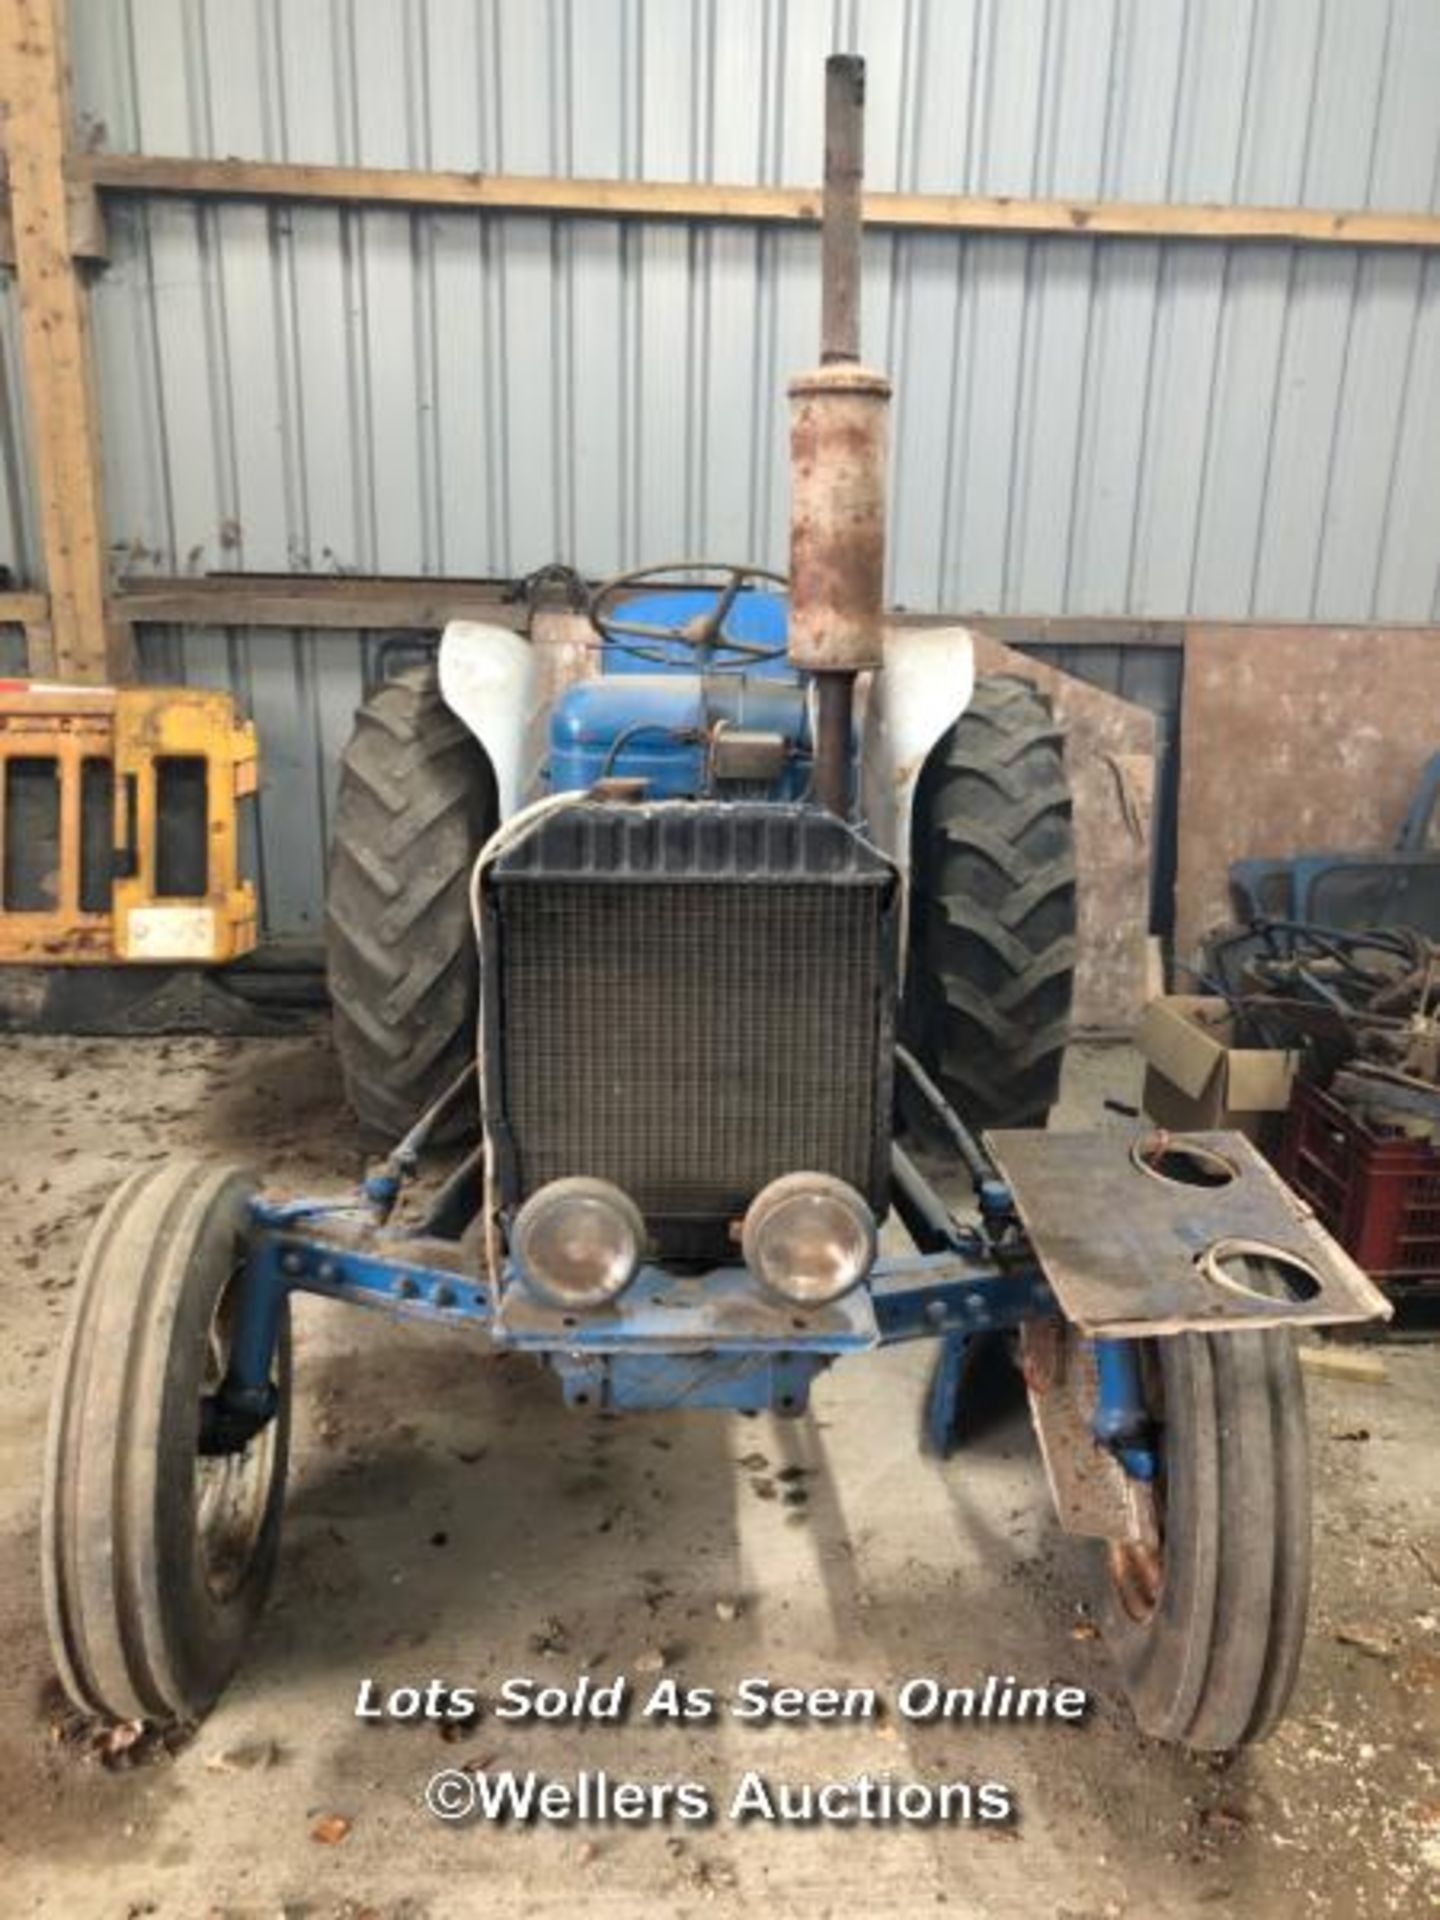 1968 FORD 3000 TRACTOR, REG: OTT 696G, DIESEL ENGINE, INIDCATING 4028 HOURS, INCL. LOGBOOK, LARGE - Image 2 of 29